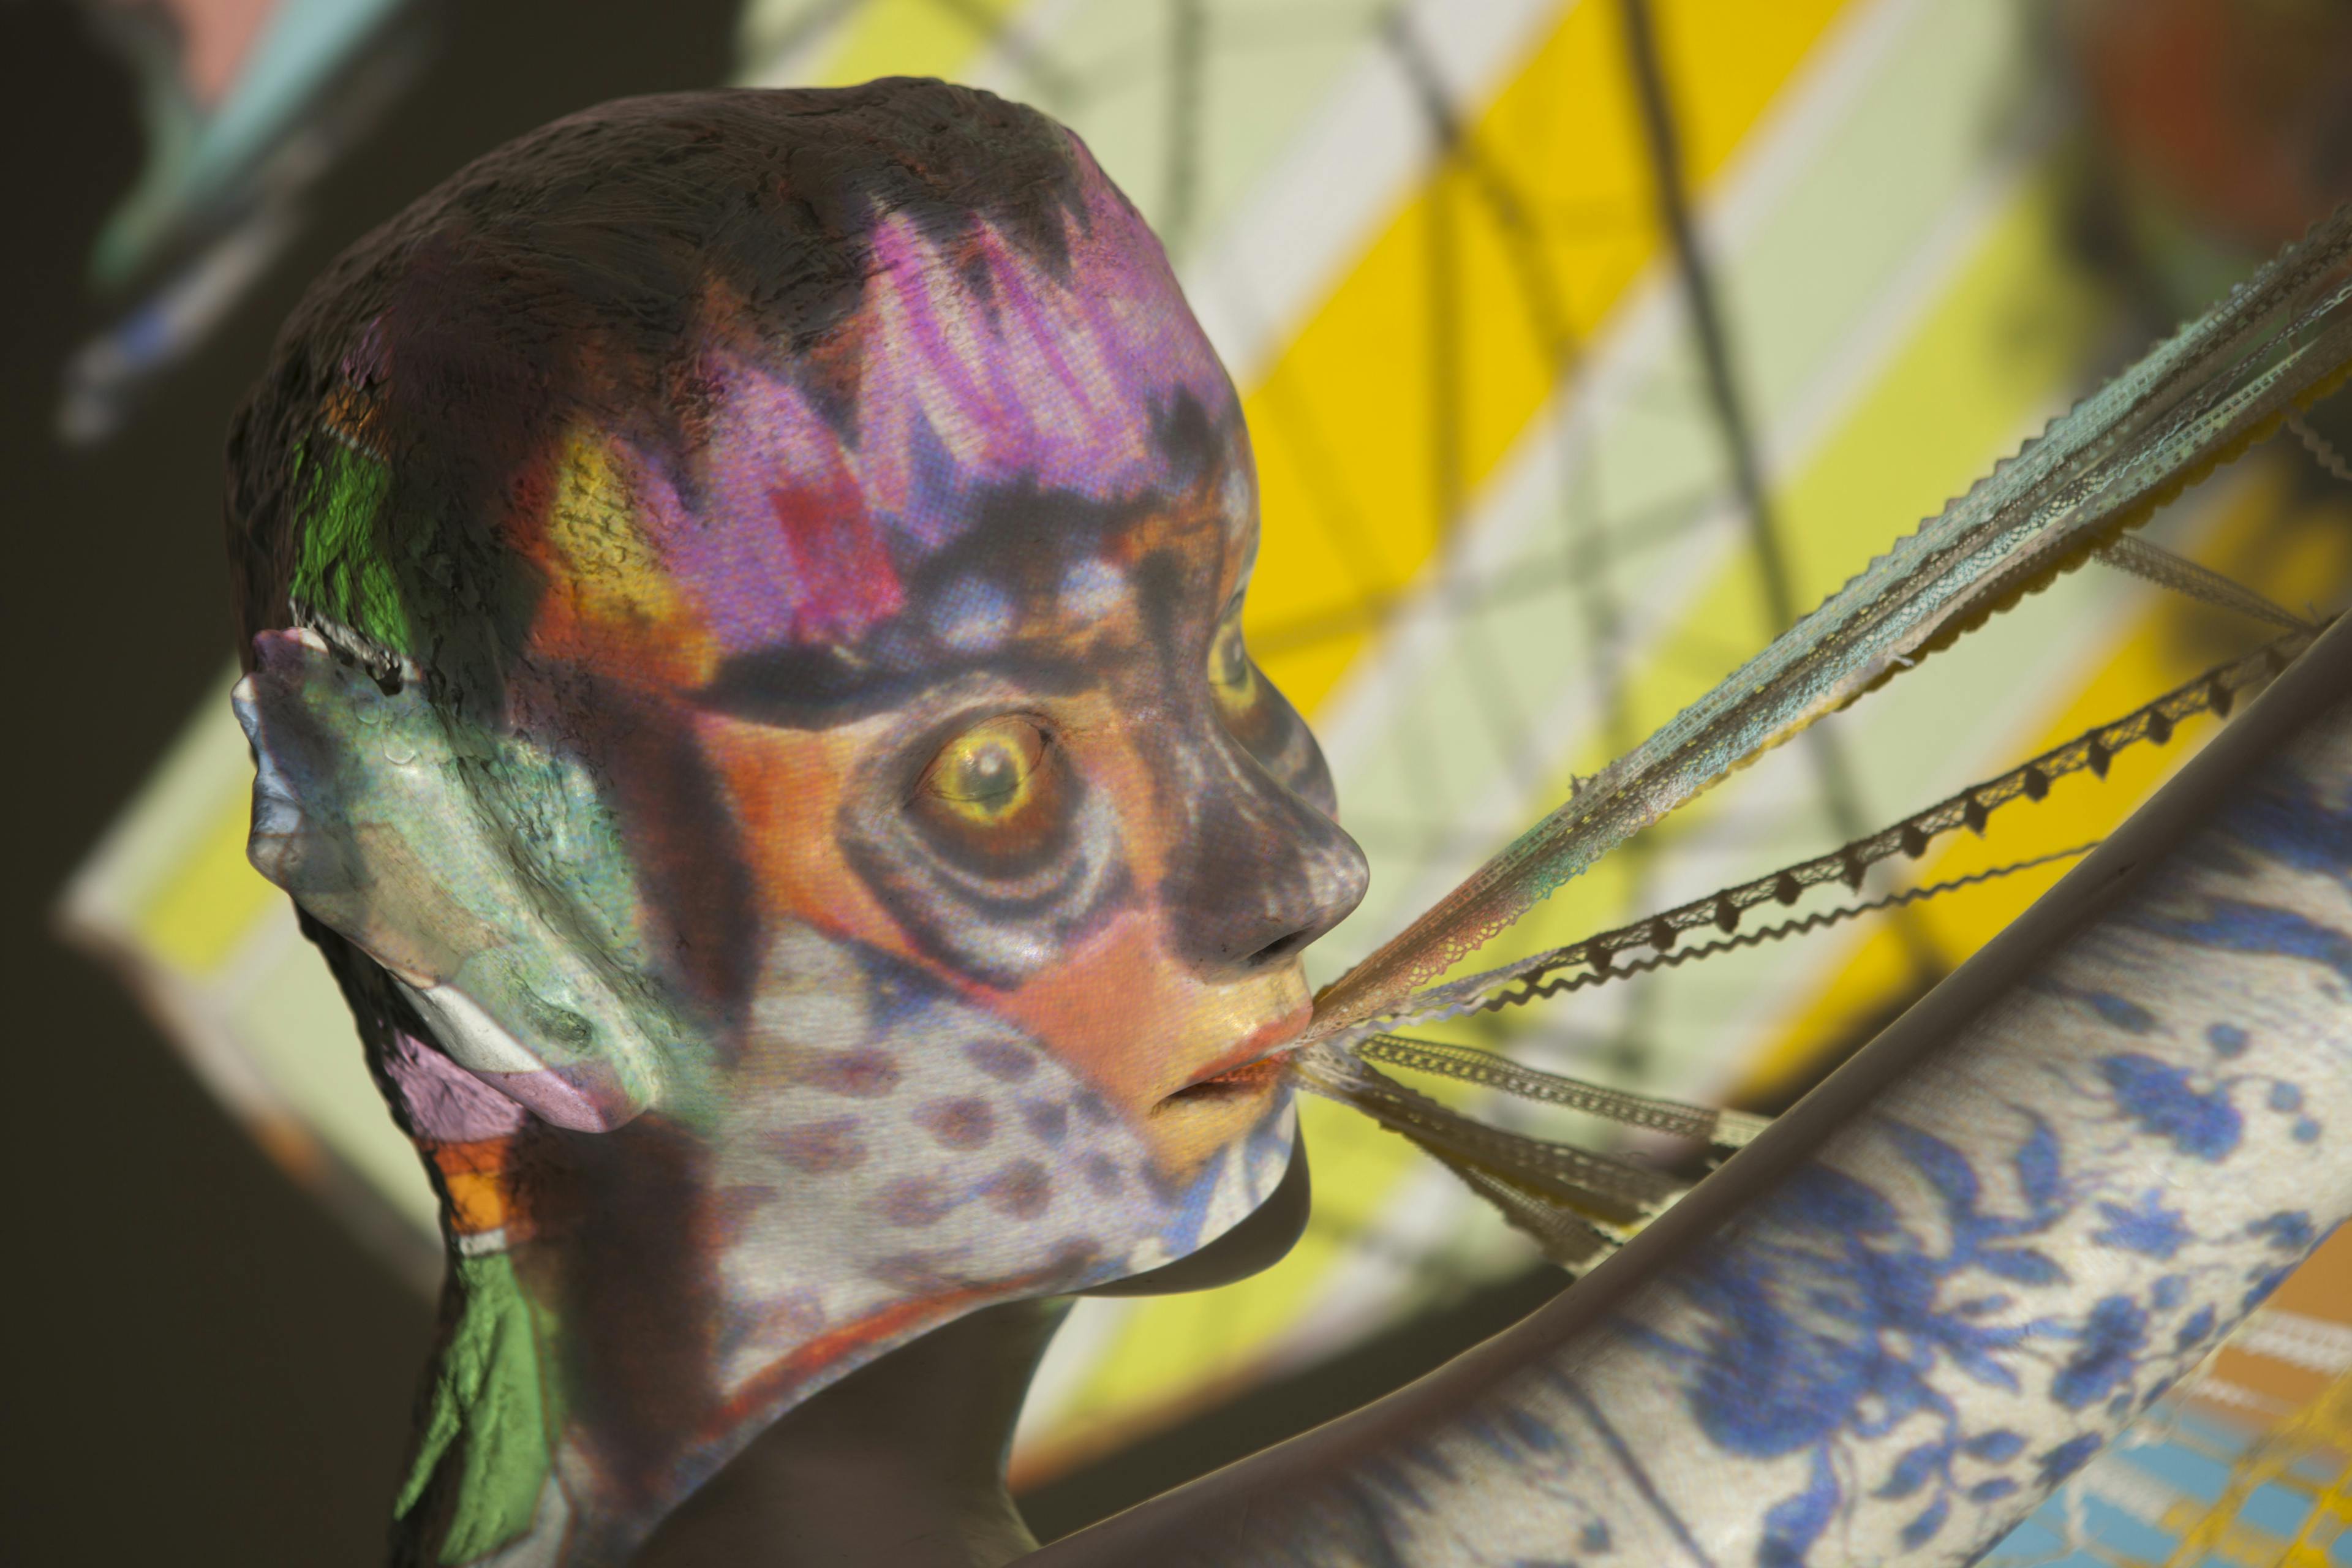 A human head-like plaster sculpture lit by a colourful, patterned projection. Owl eyes in the projection line up with those of the sculpture’s and lace strings emerge from its mouth.